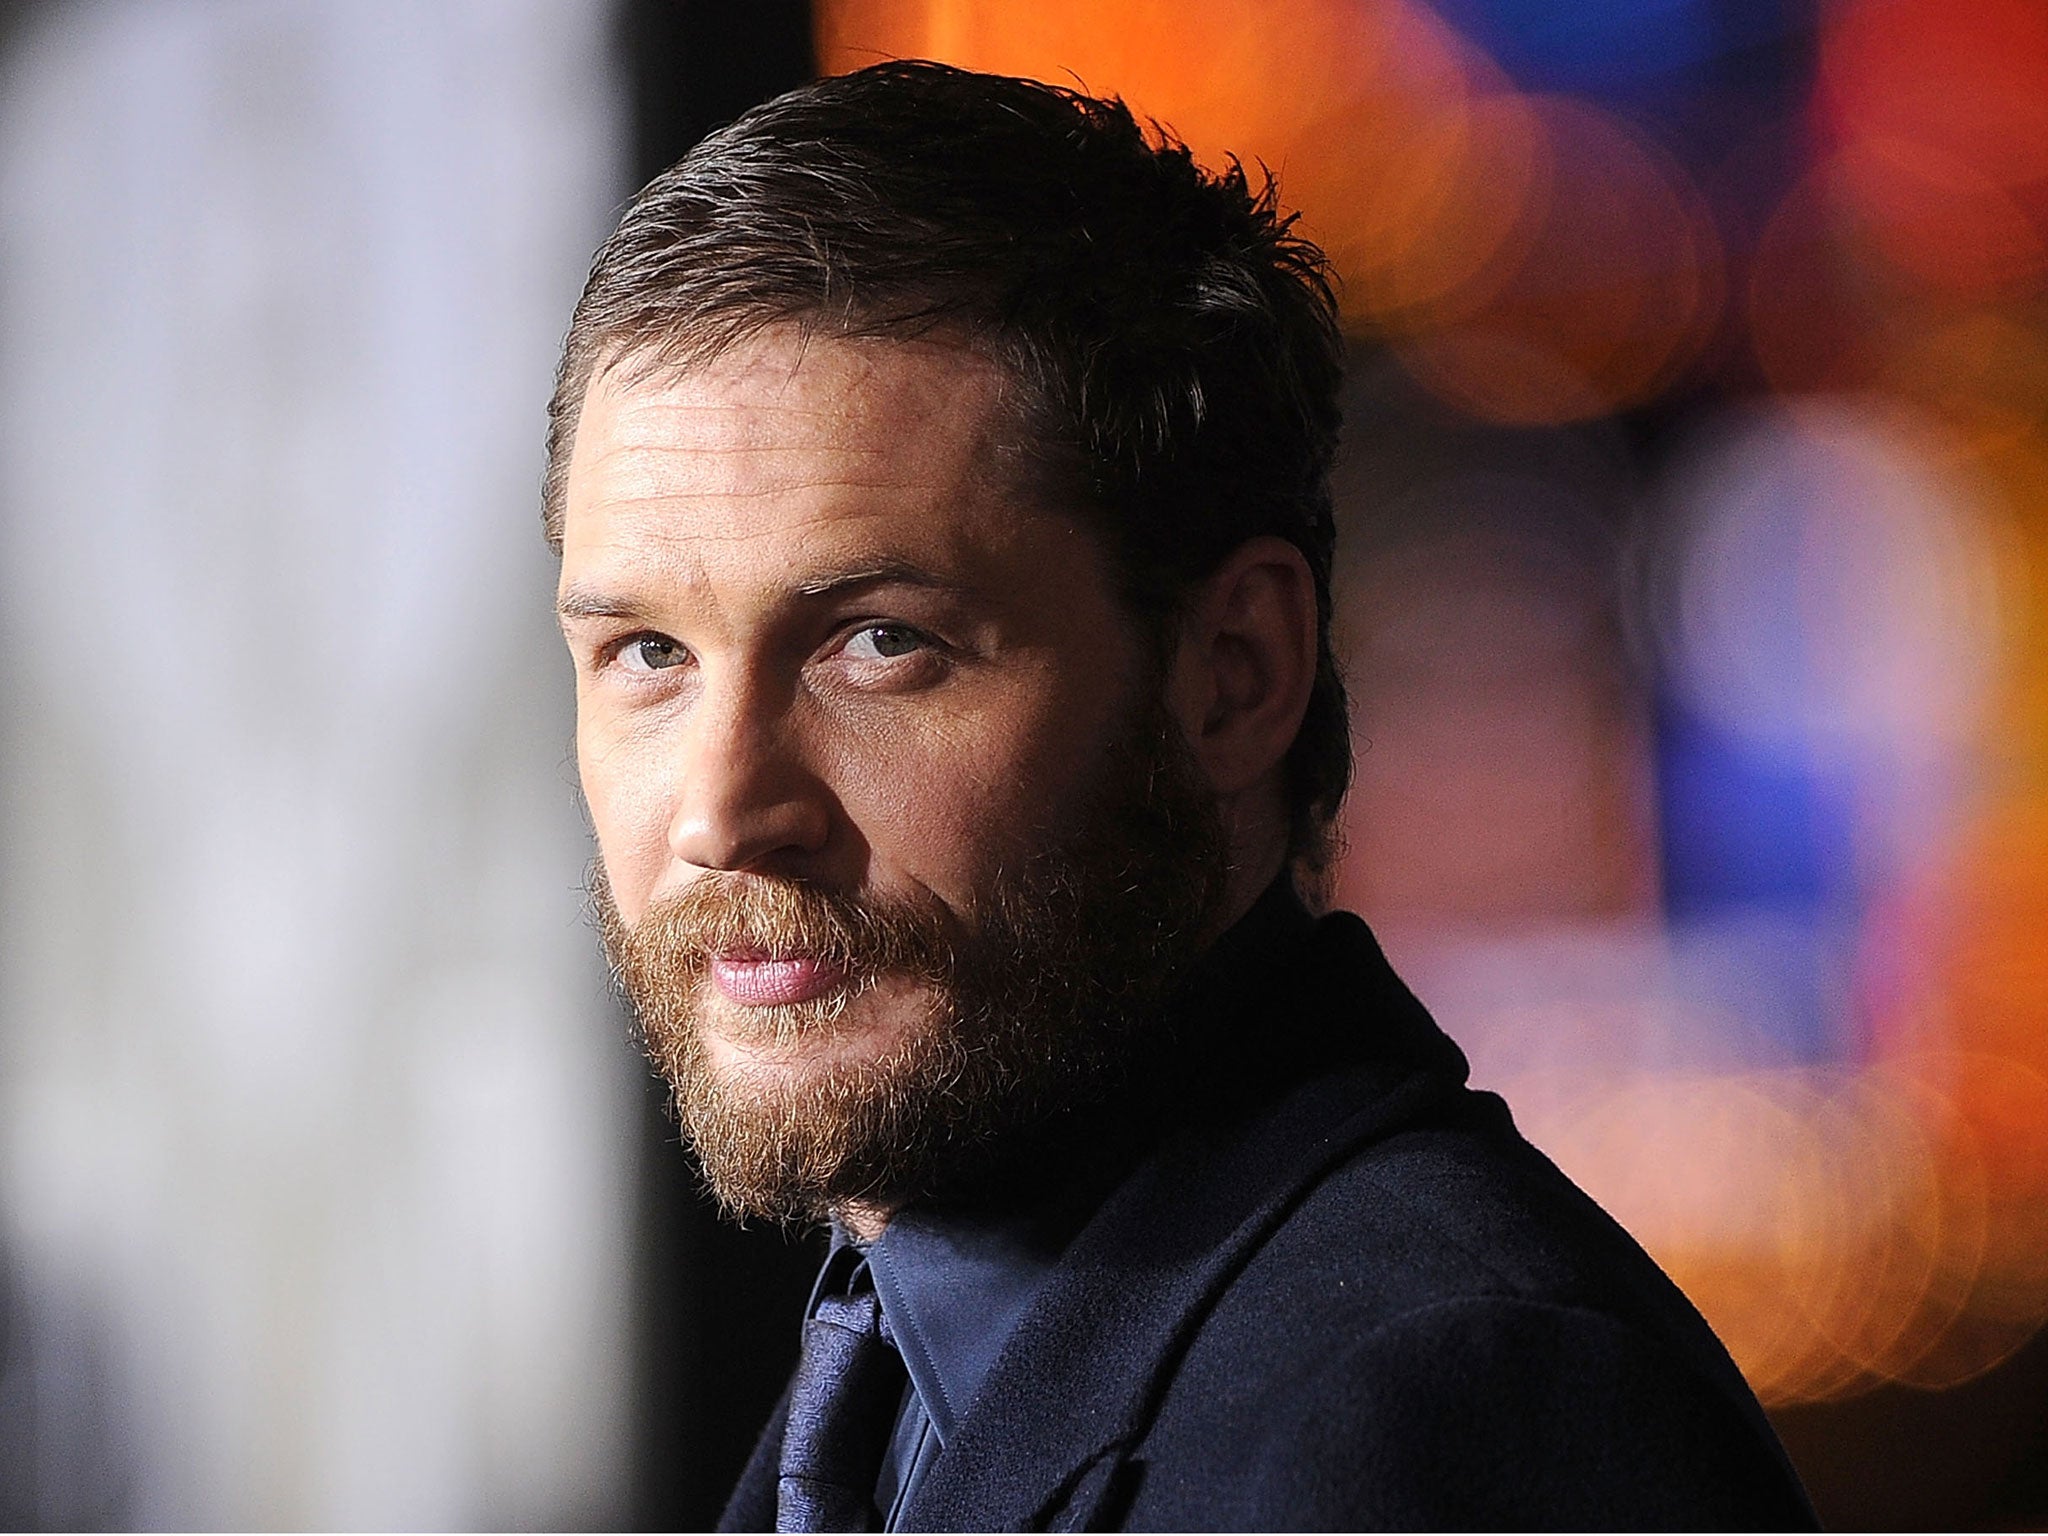 English actor Tom Hardy is understood to have pulled out of the upcoming Suicide Squad film